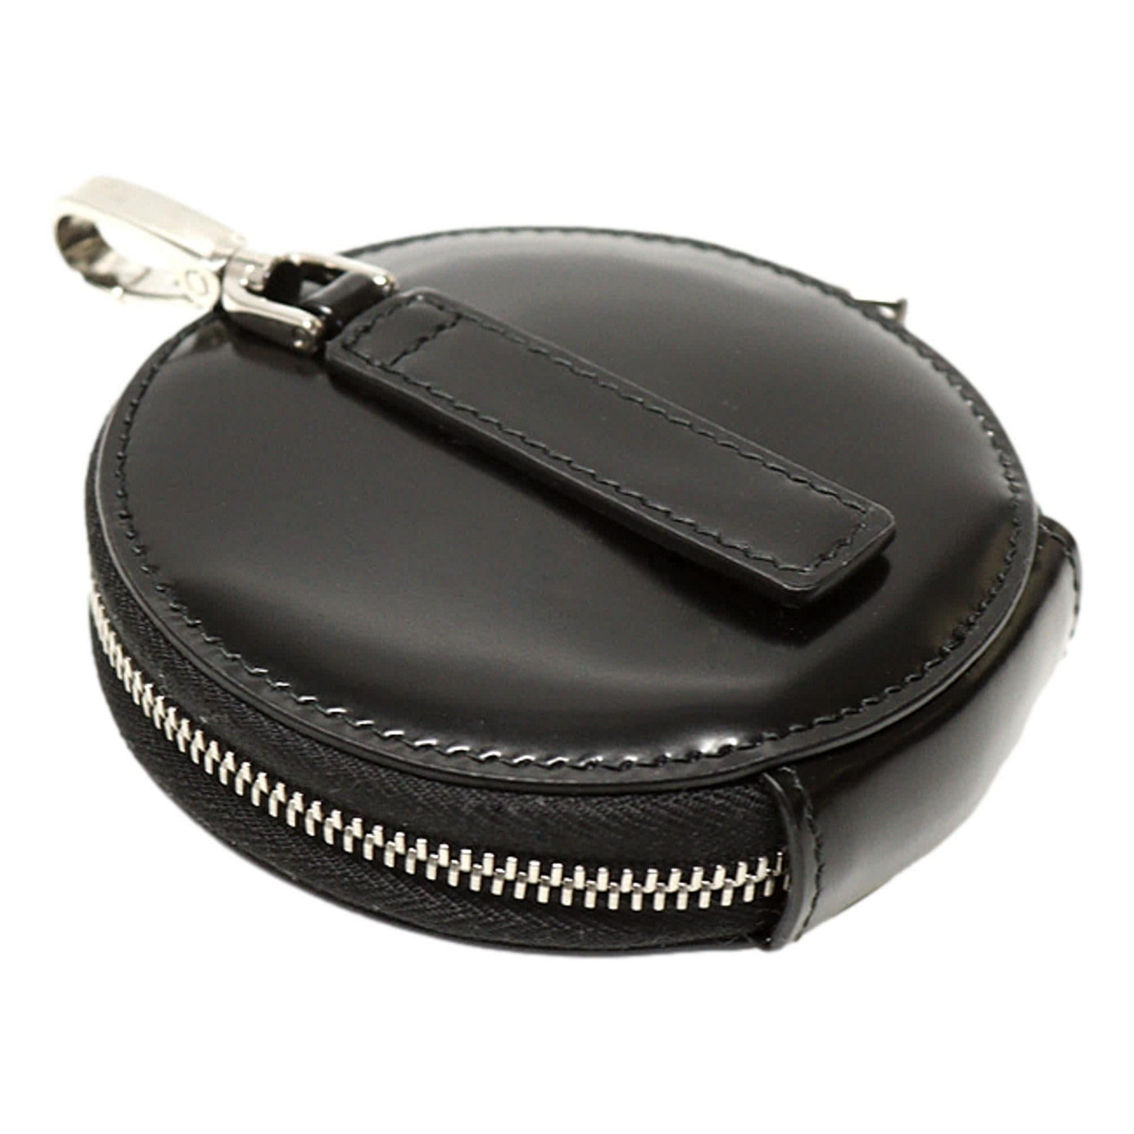 Prada Triangle Plaque Smooth Black Leather Round Mini Pouch Keychain (New) - Image 5 of 5